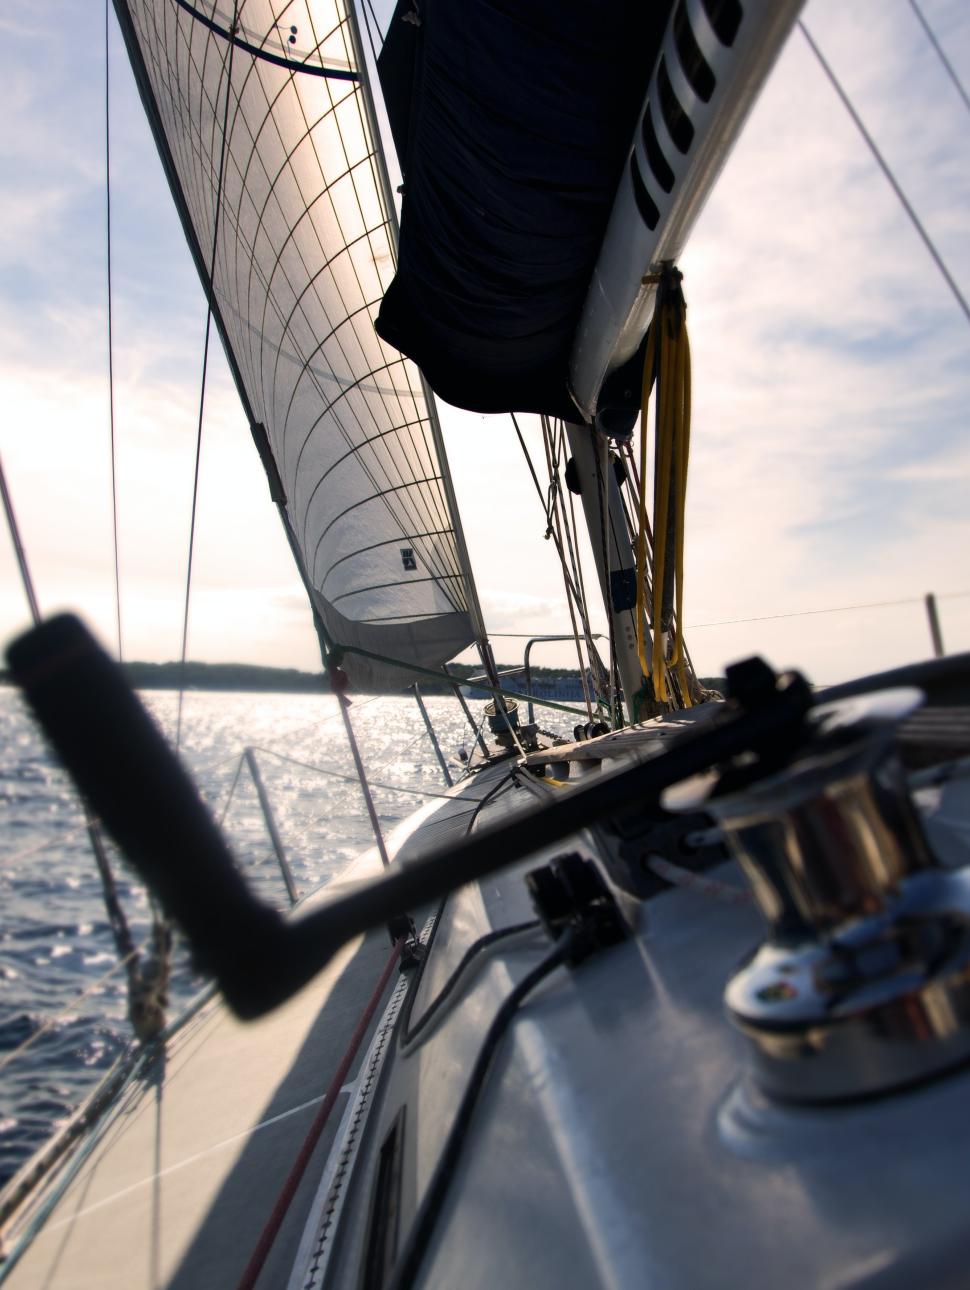 A view of the ocean from a yacht. the sails and yacht is visible on an incline on the horizon